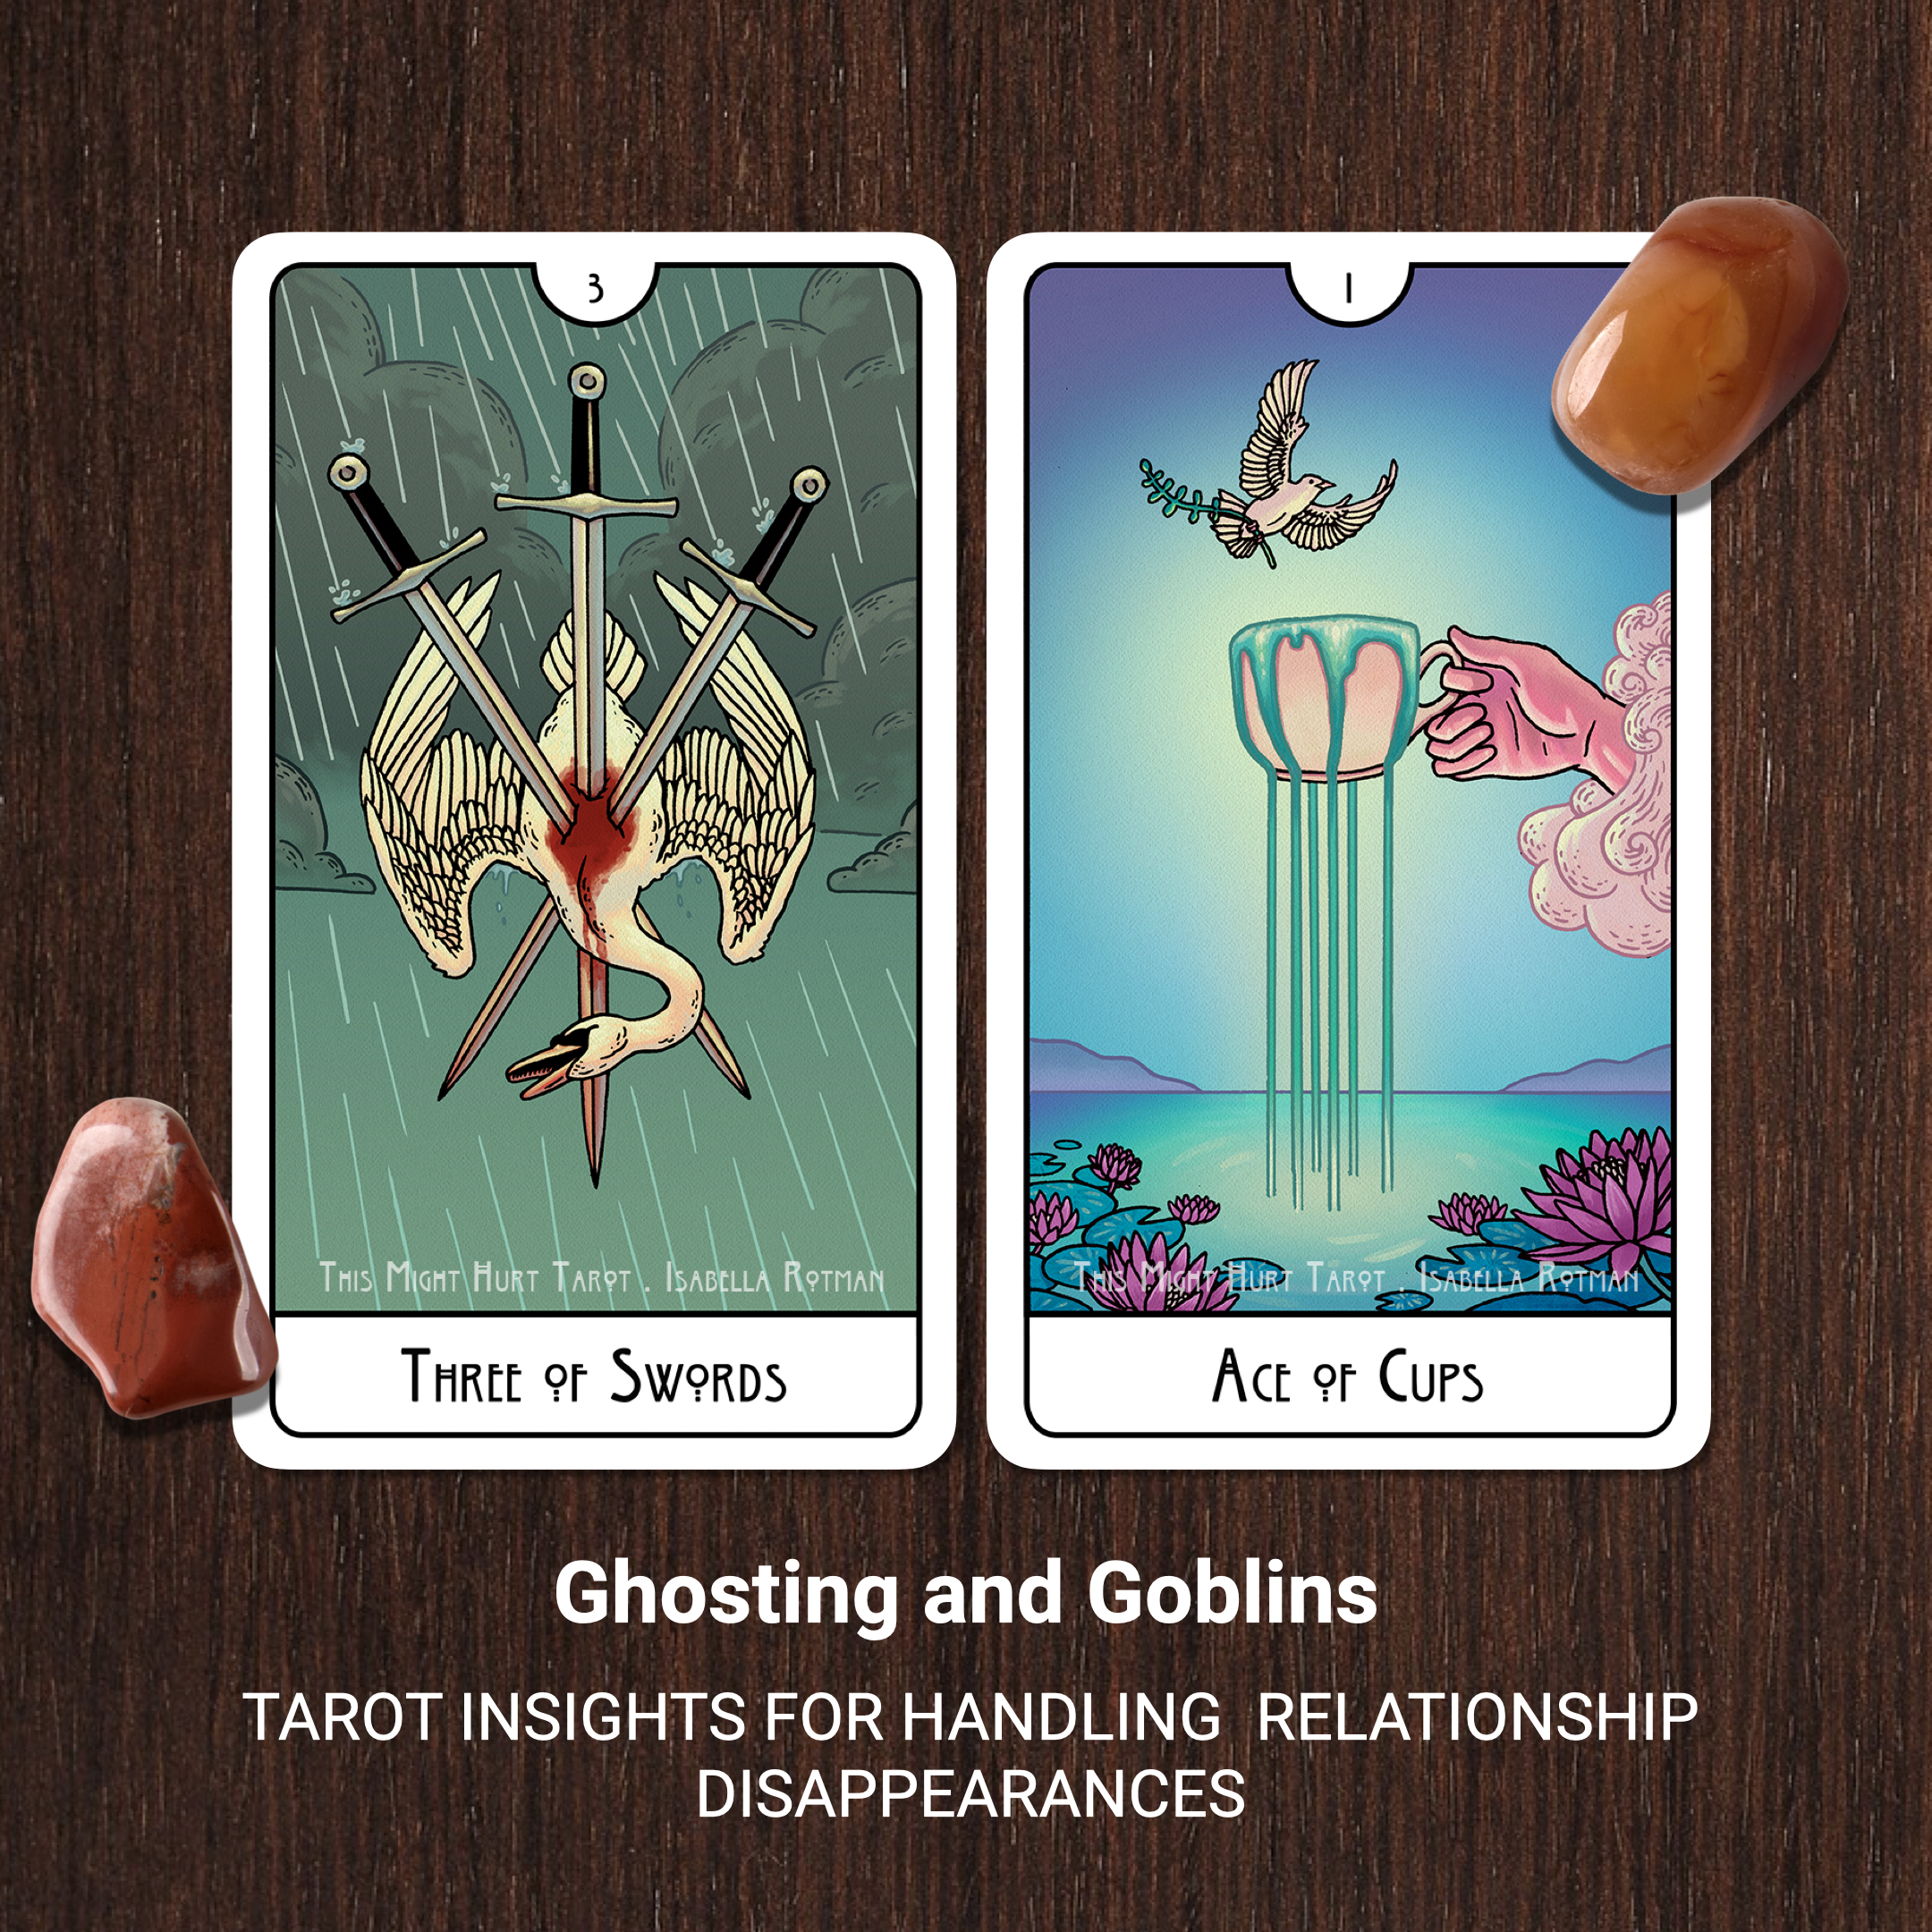 Ghosting and Goblins - The Three of Swords and The Ace of Cups